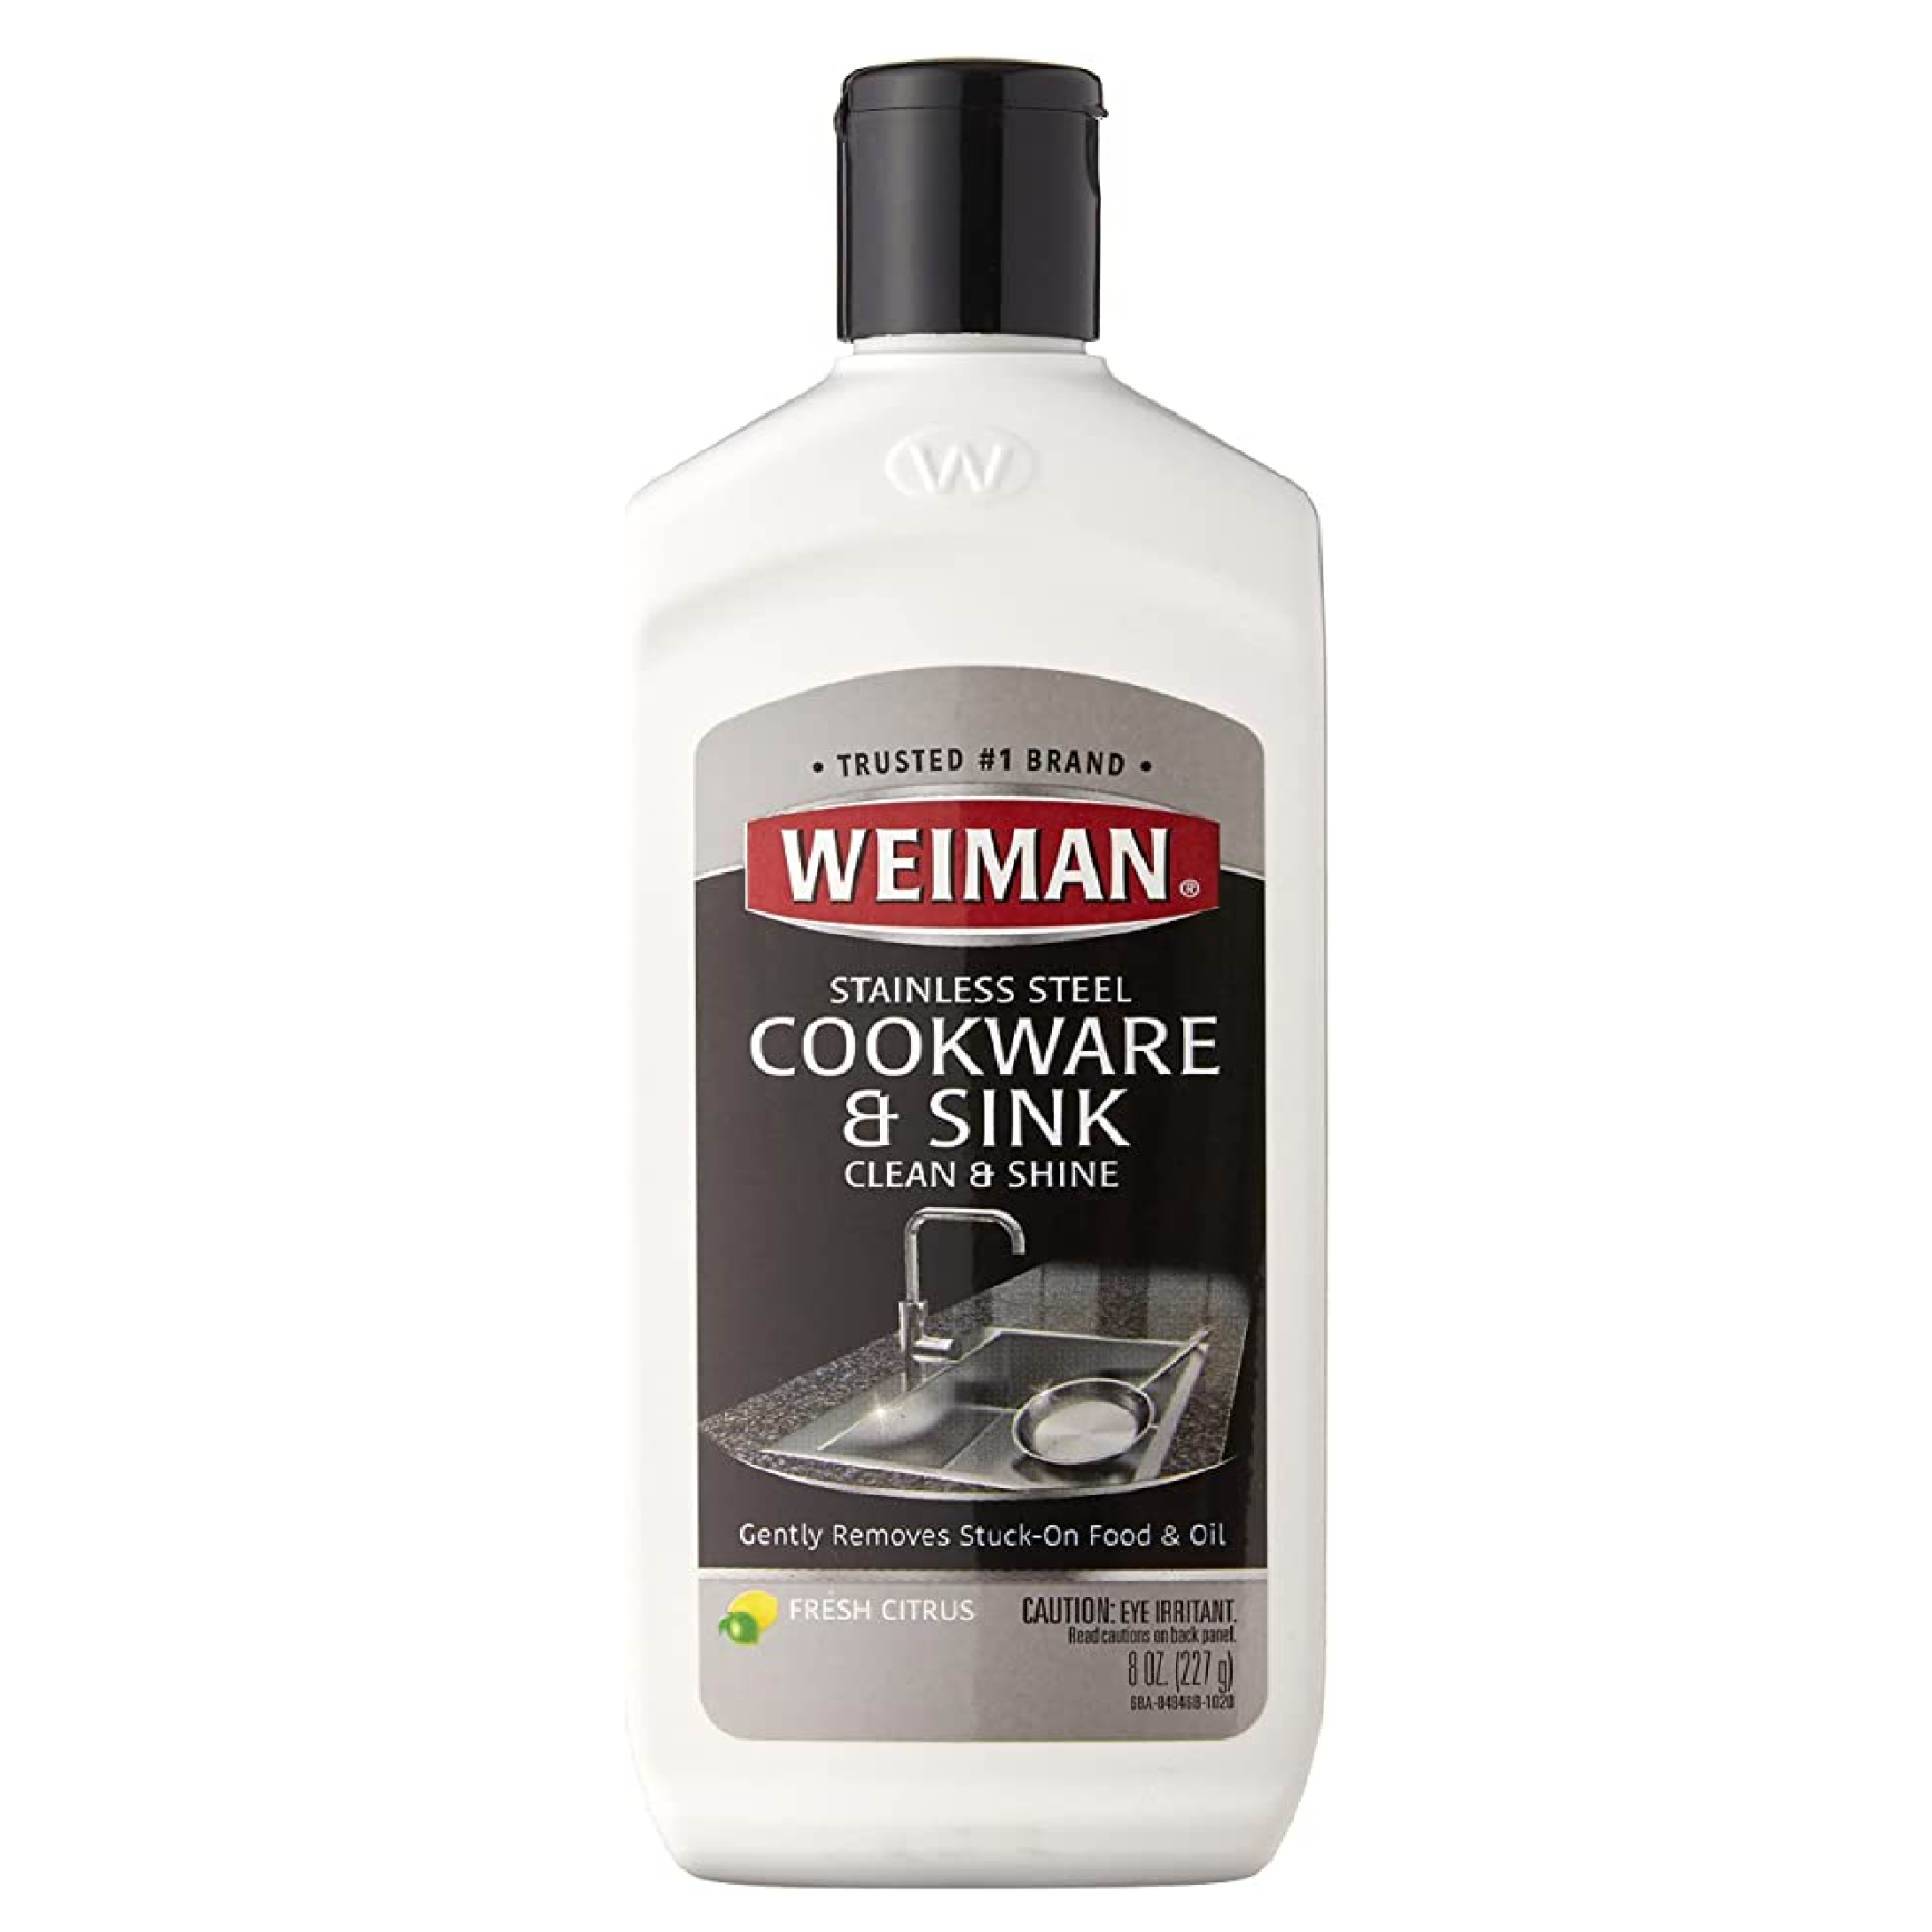 Weiman Stainless Steel Cookware And Sink Cleaner And Polish 227ML (FRESH CITRUS)